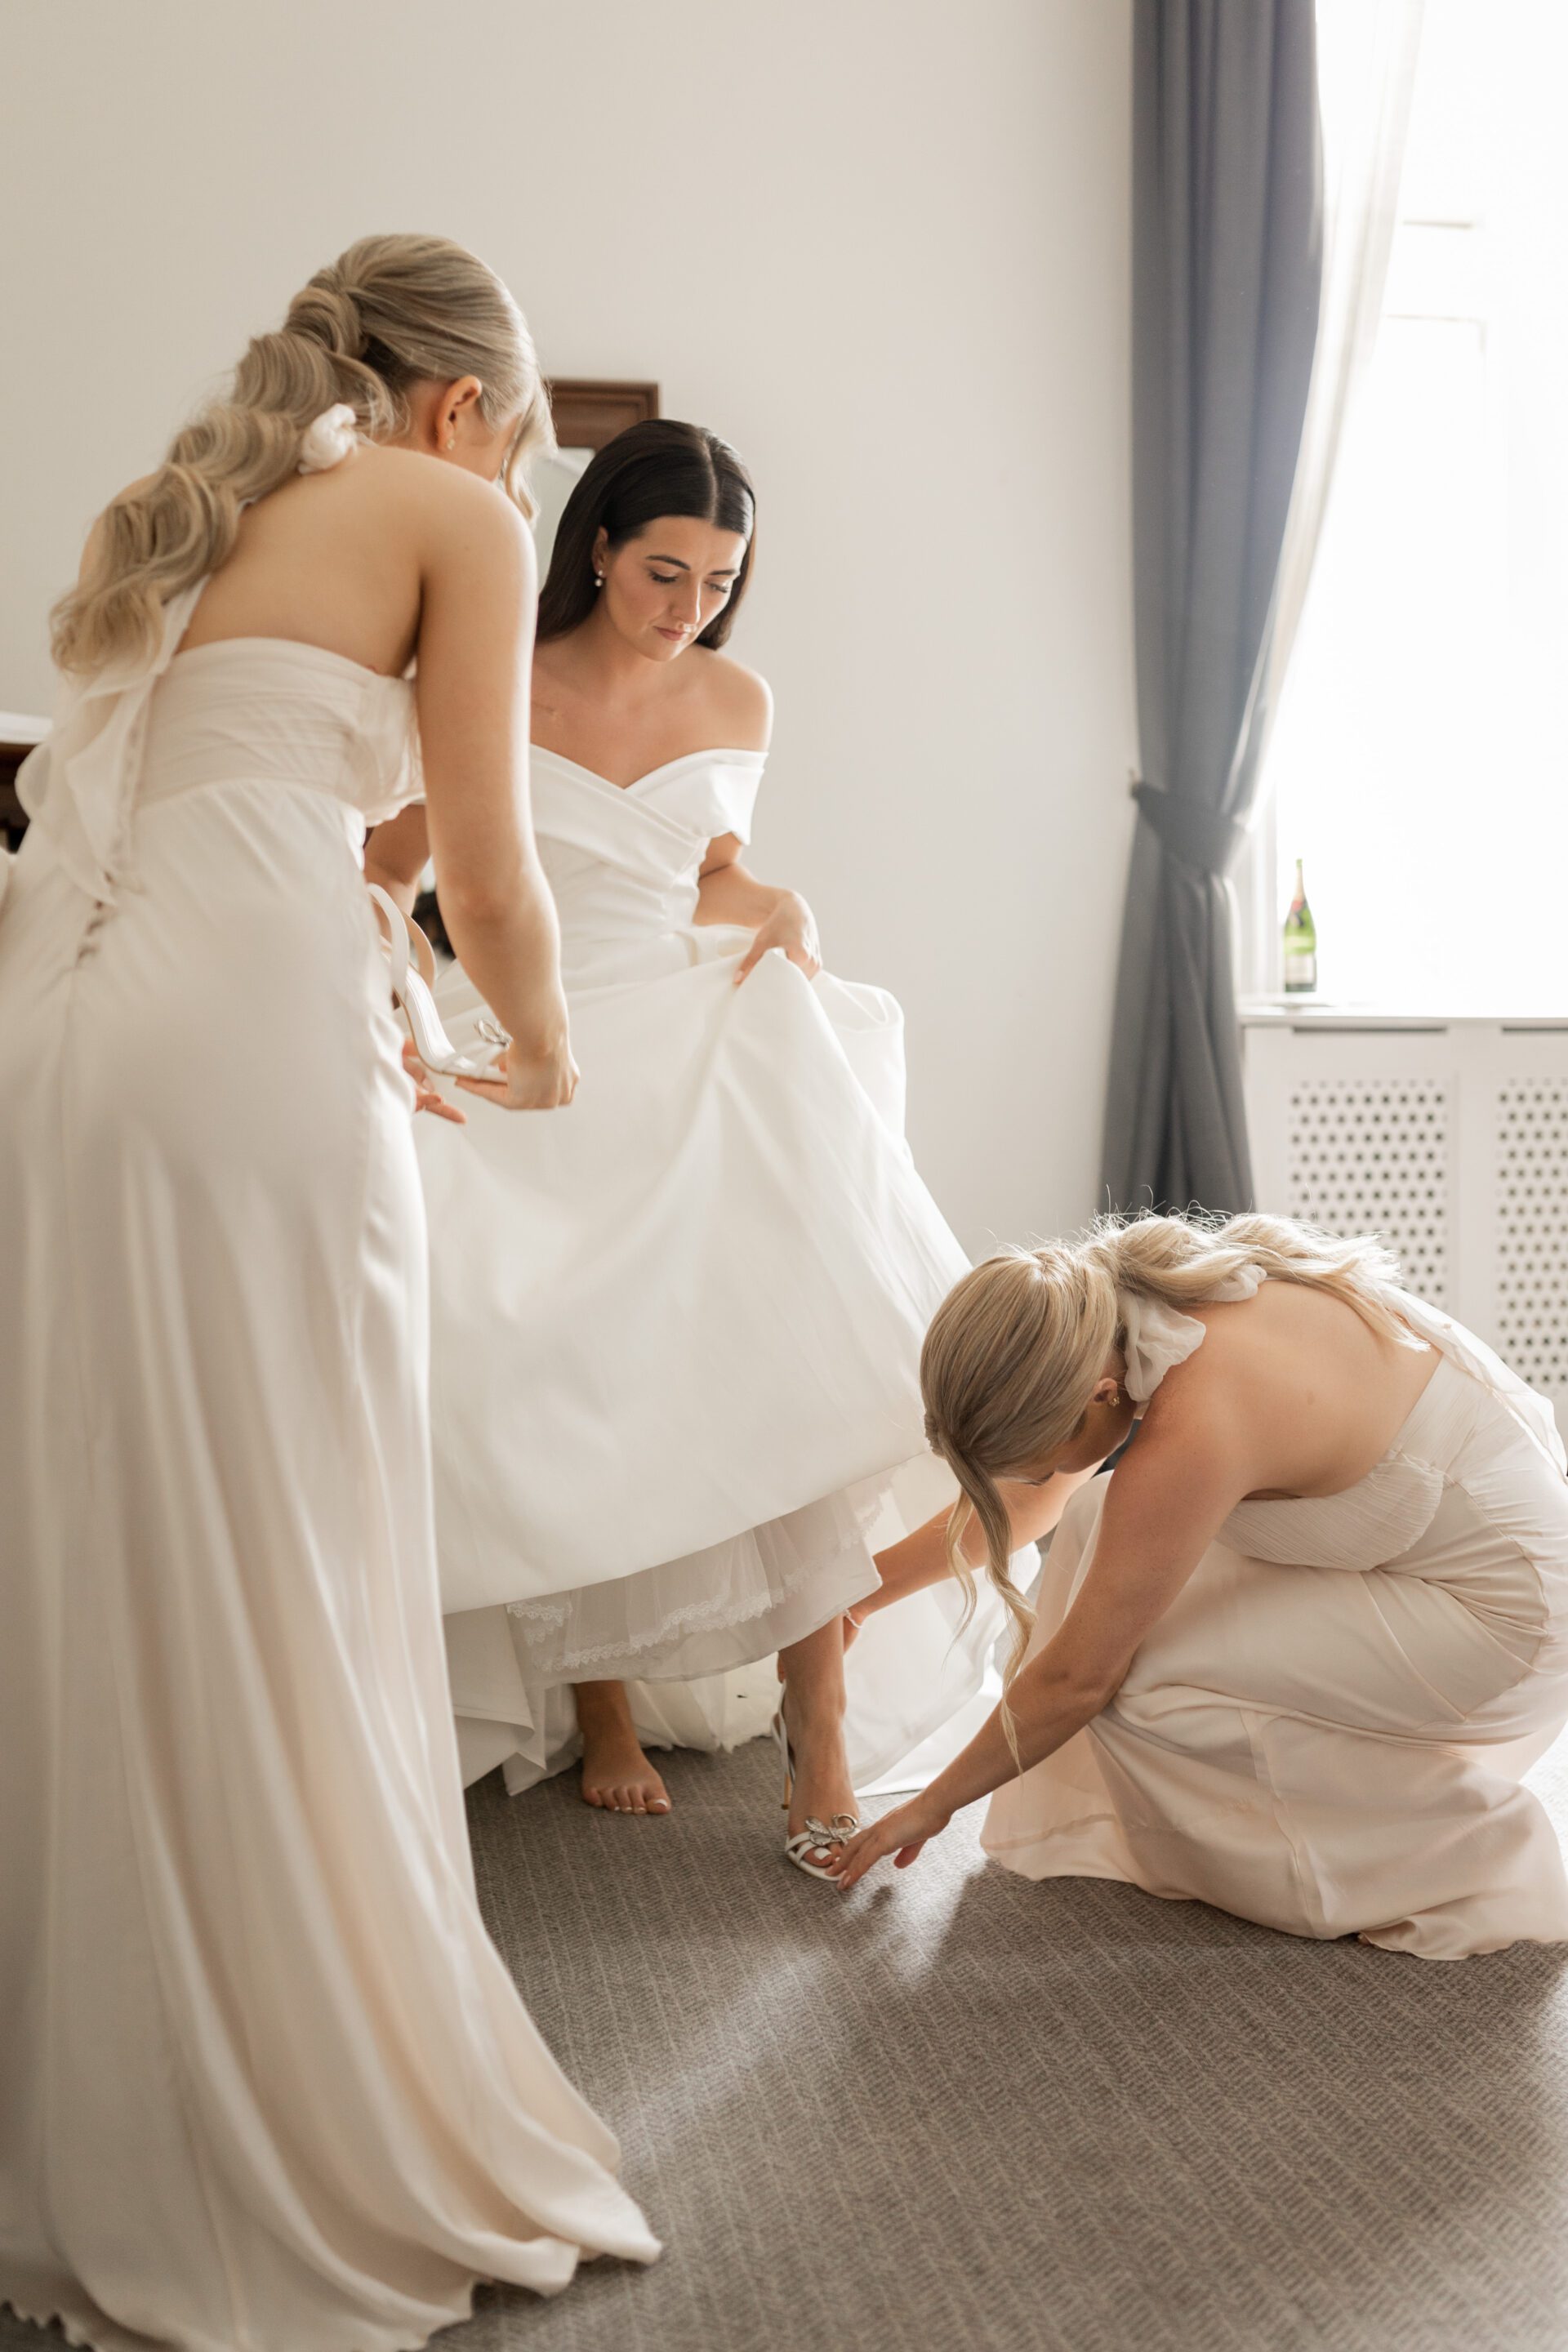 The bridal party help the bride get ready for her wedding at Tortworth Court